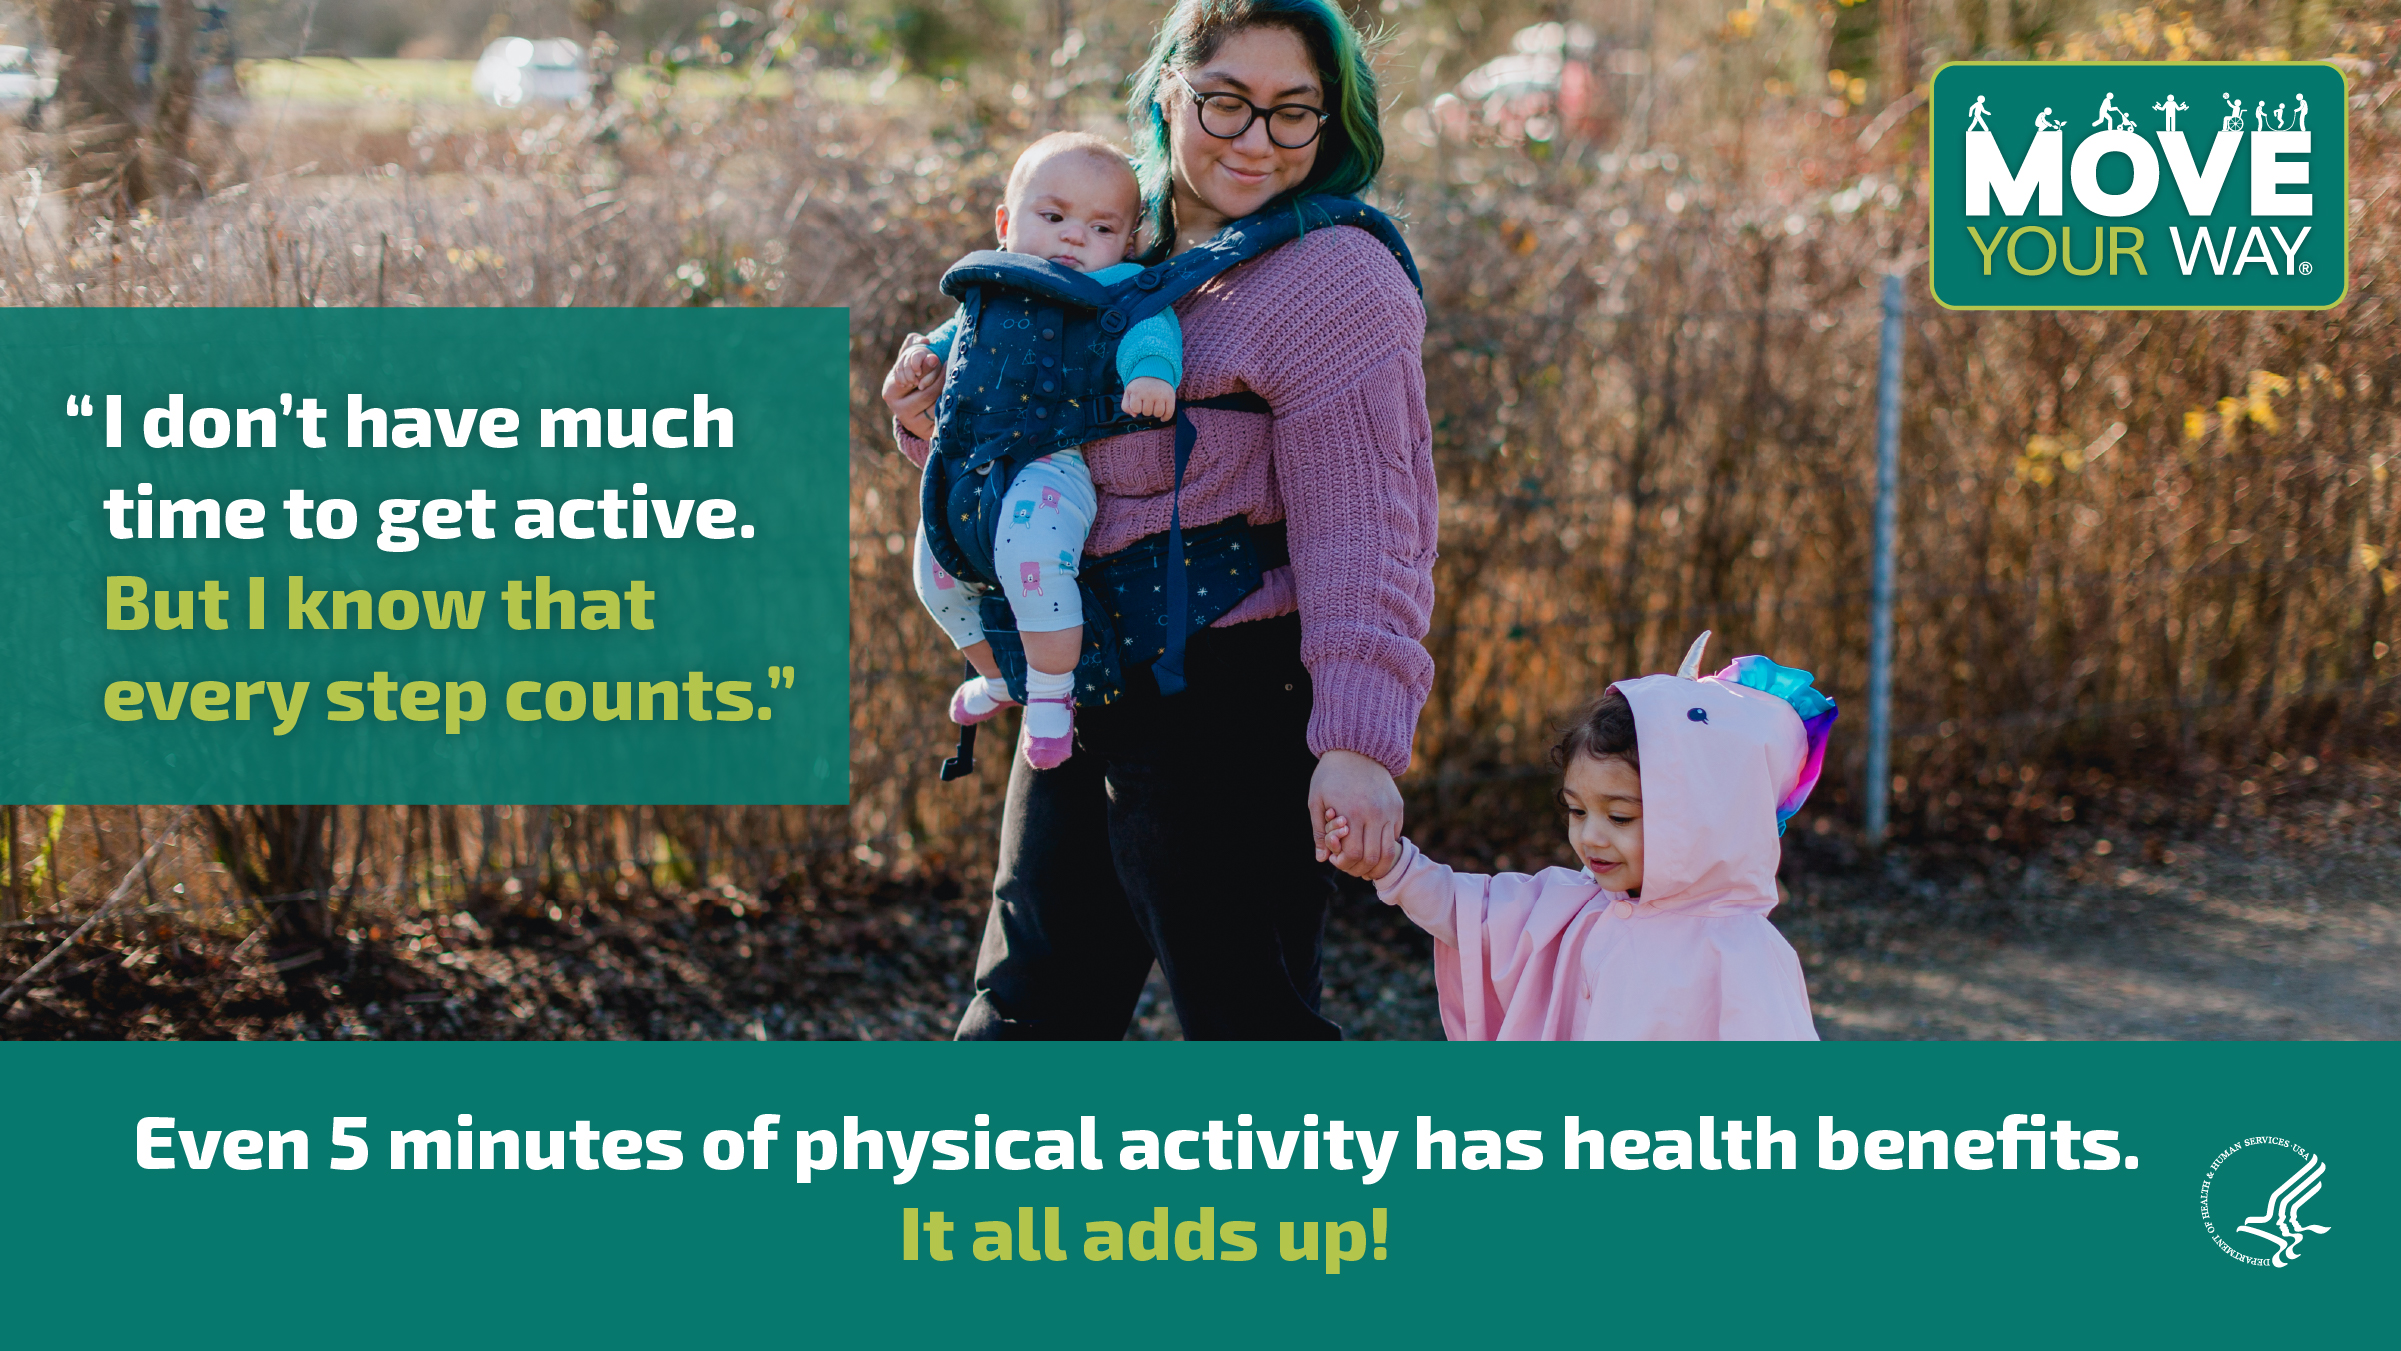 A young Hispanic mother is taking a walk at the park with her toddler and baby. The image also shows the Move Your Way logo and the following messages: "I don’t have much time to get active. But I know that every step counts." and "Even 5 minutes of physical activity has health benefits. It all adds up!" 